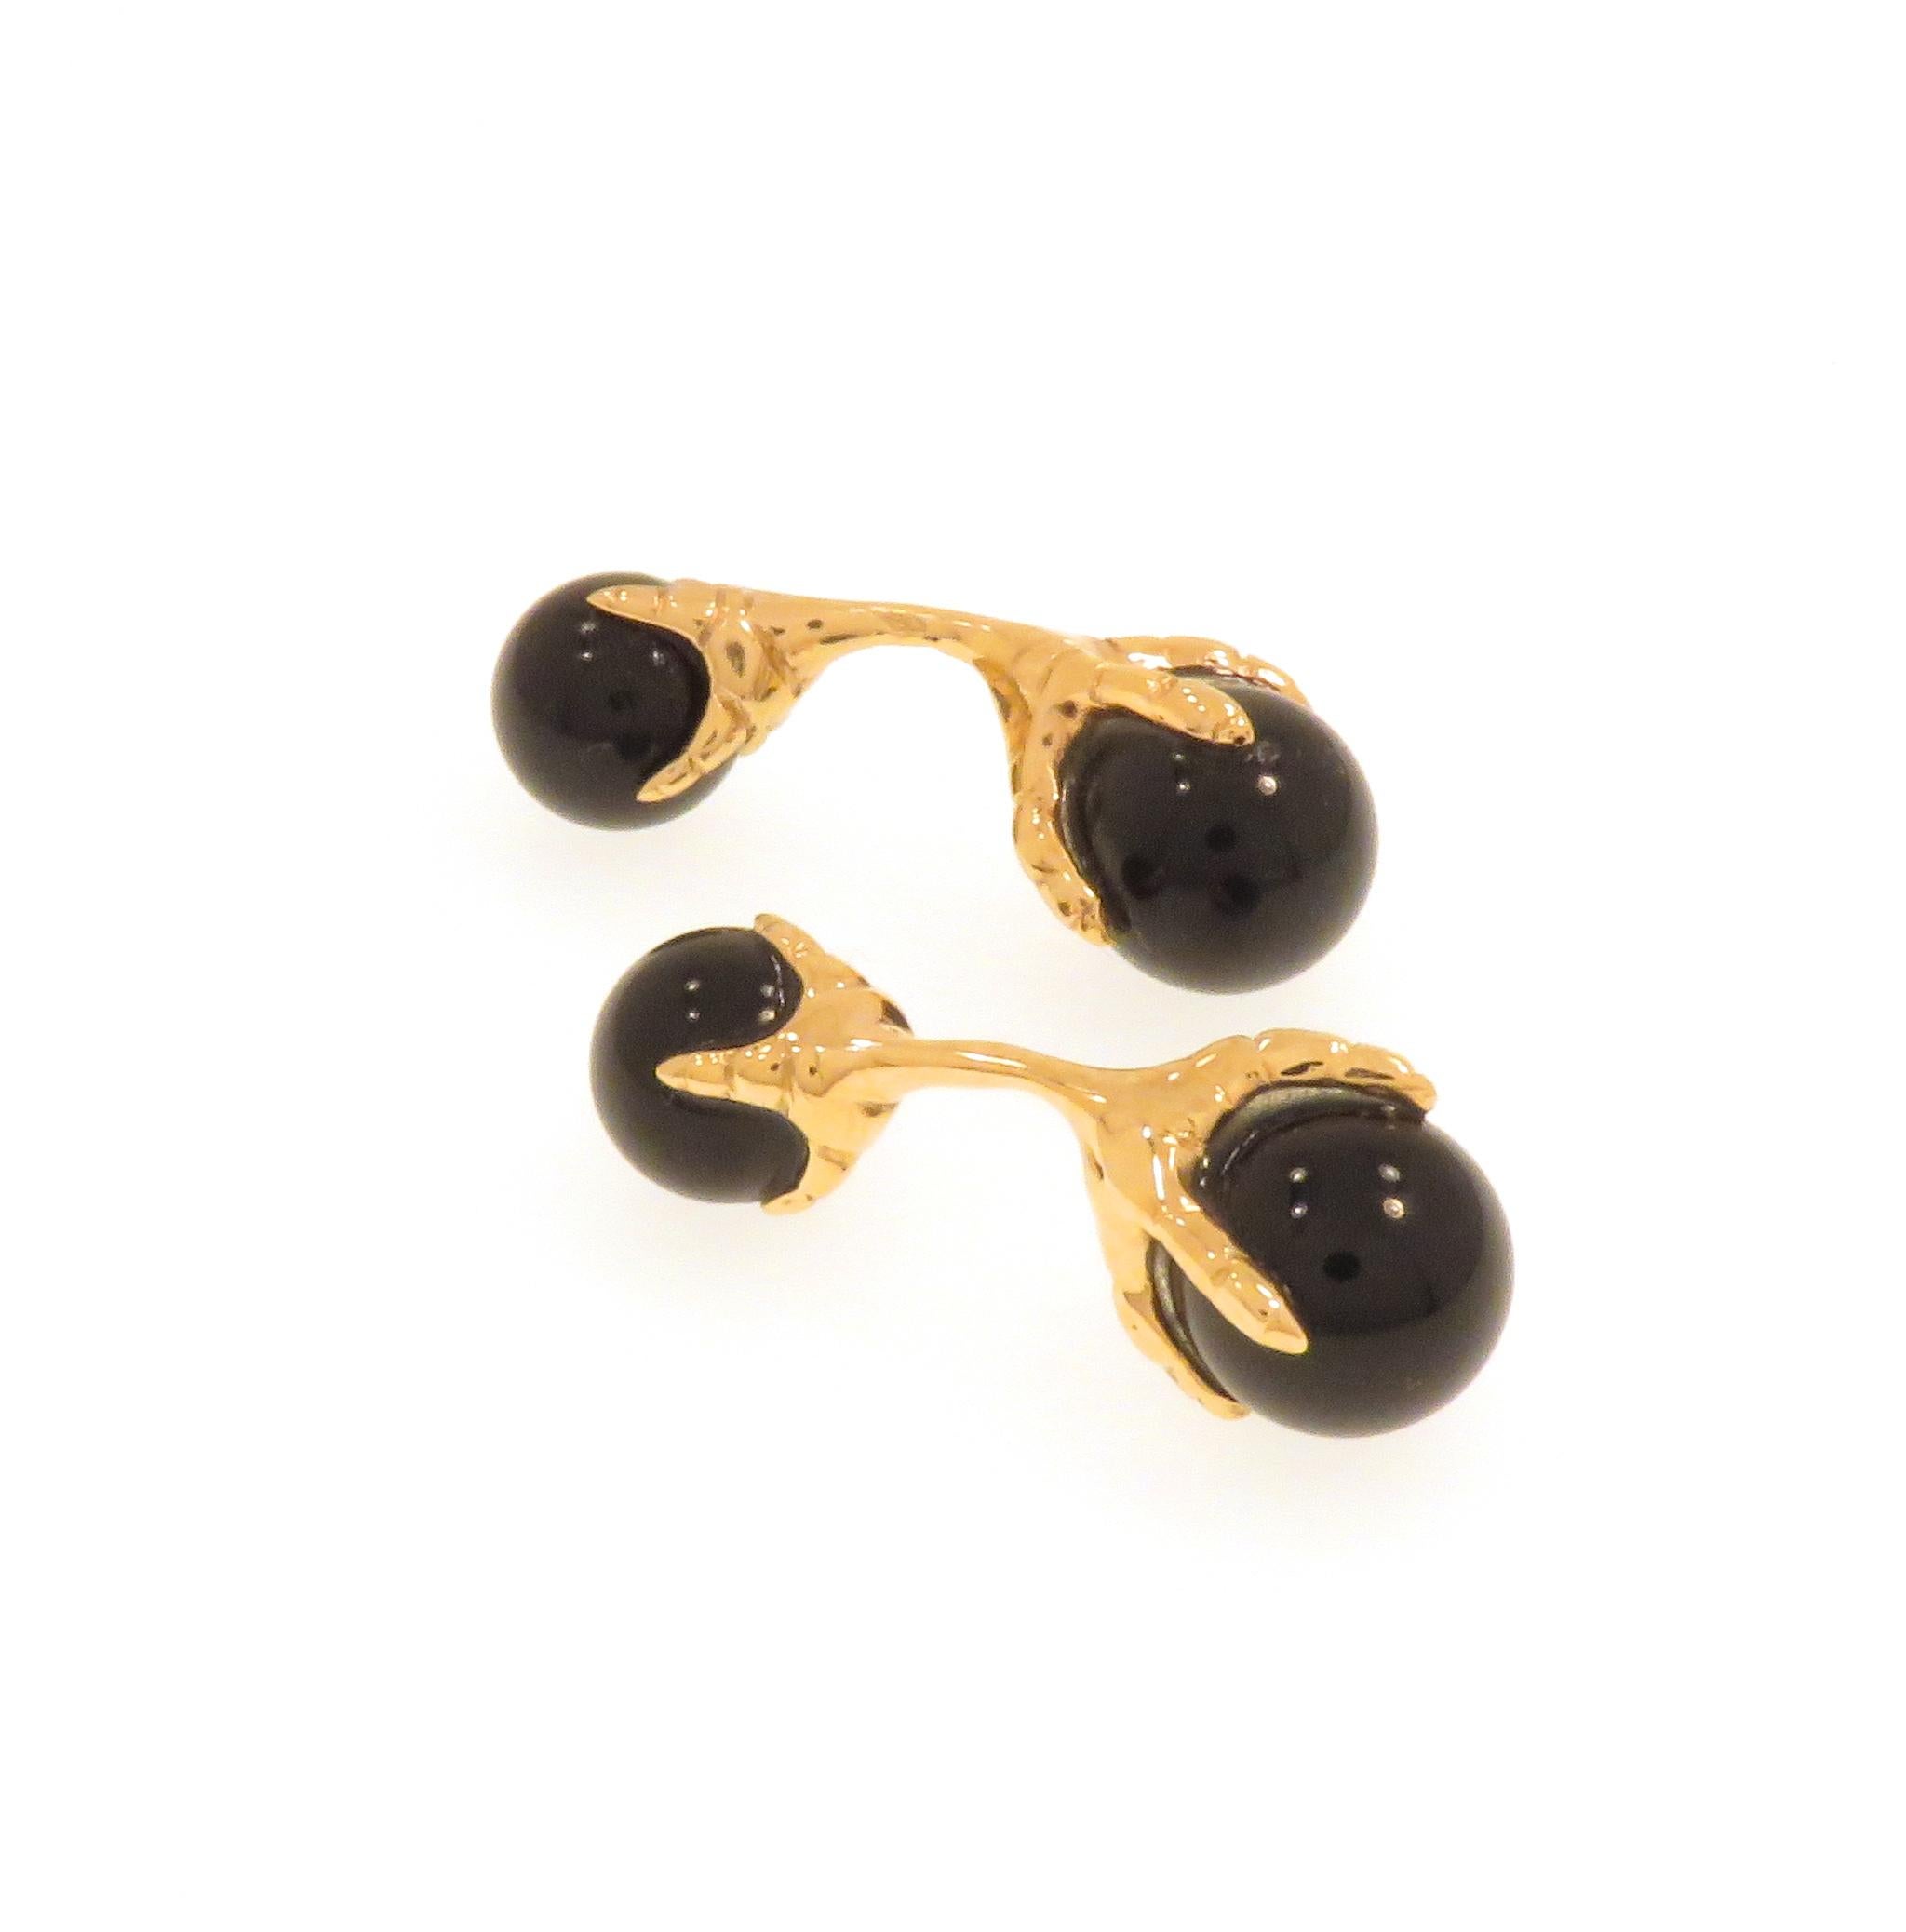 Elegant cufflinks handcrafted in 9k rose gold featuring eagle talons grabbing smooth onyx beads. The size of the bigger beads is 12 millimeters / 0.472 inches and of the smaller ones is 10 millimeters / 0.393 inches.  These cufflinks are handcrafted